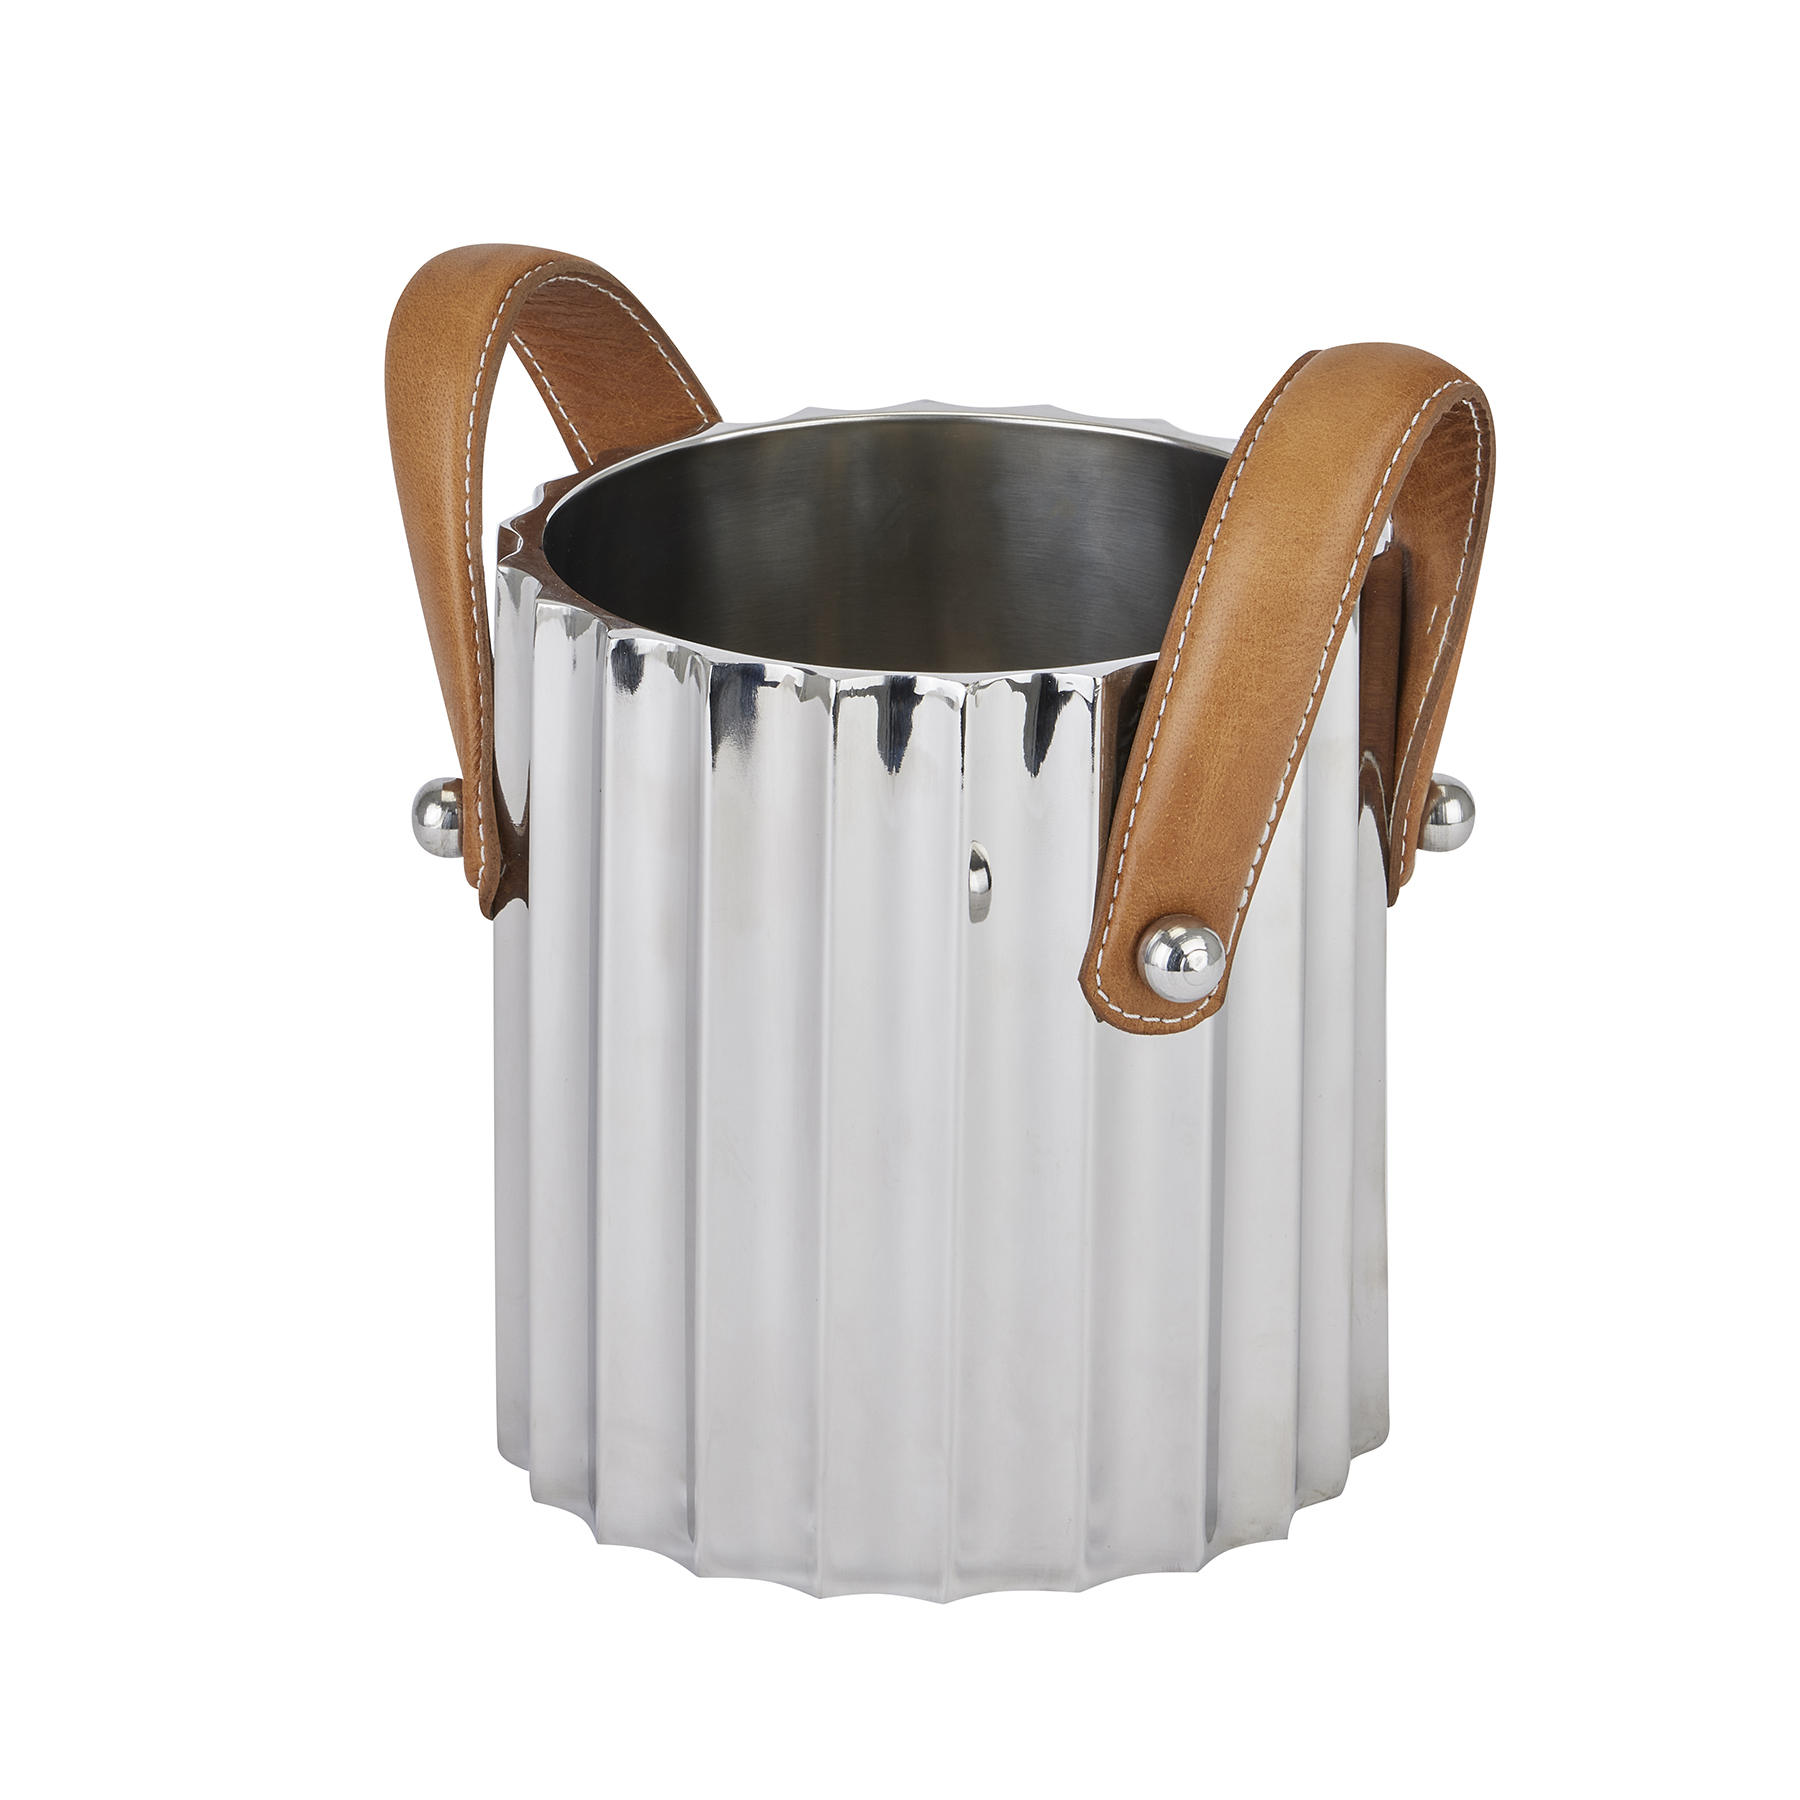 Silver Fluted Leather Handled Single Champagne Cooler - Image 1